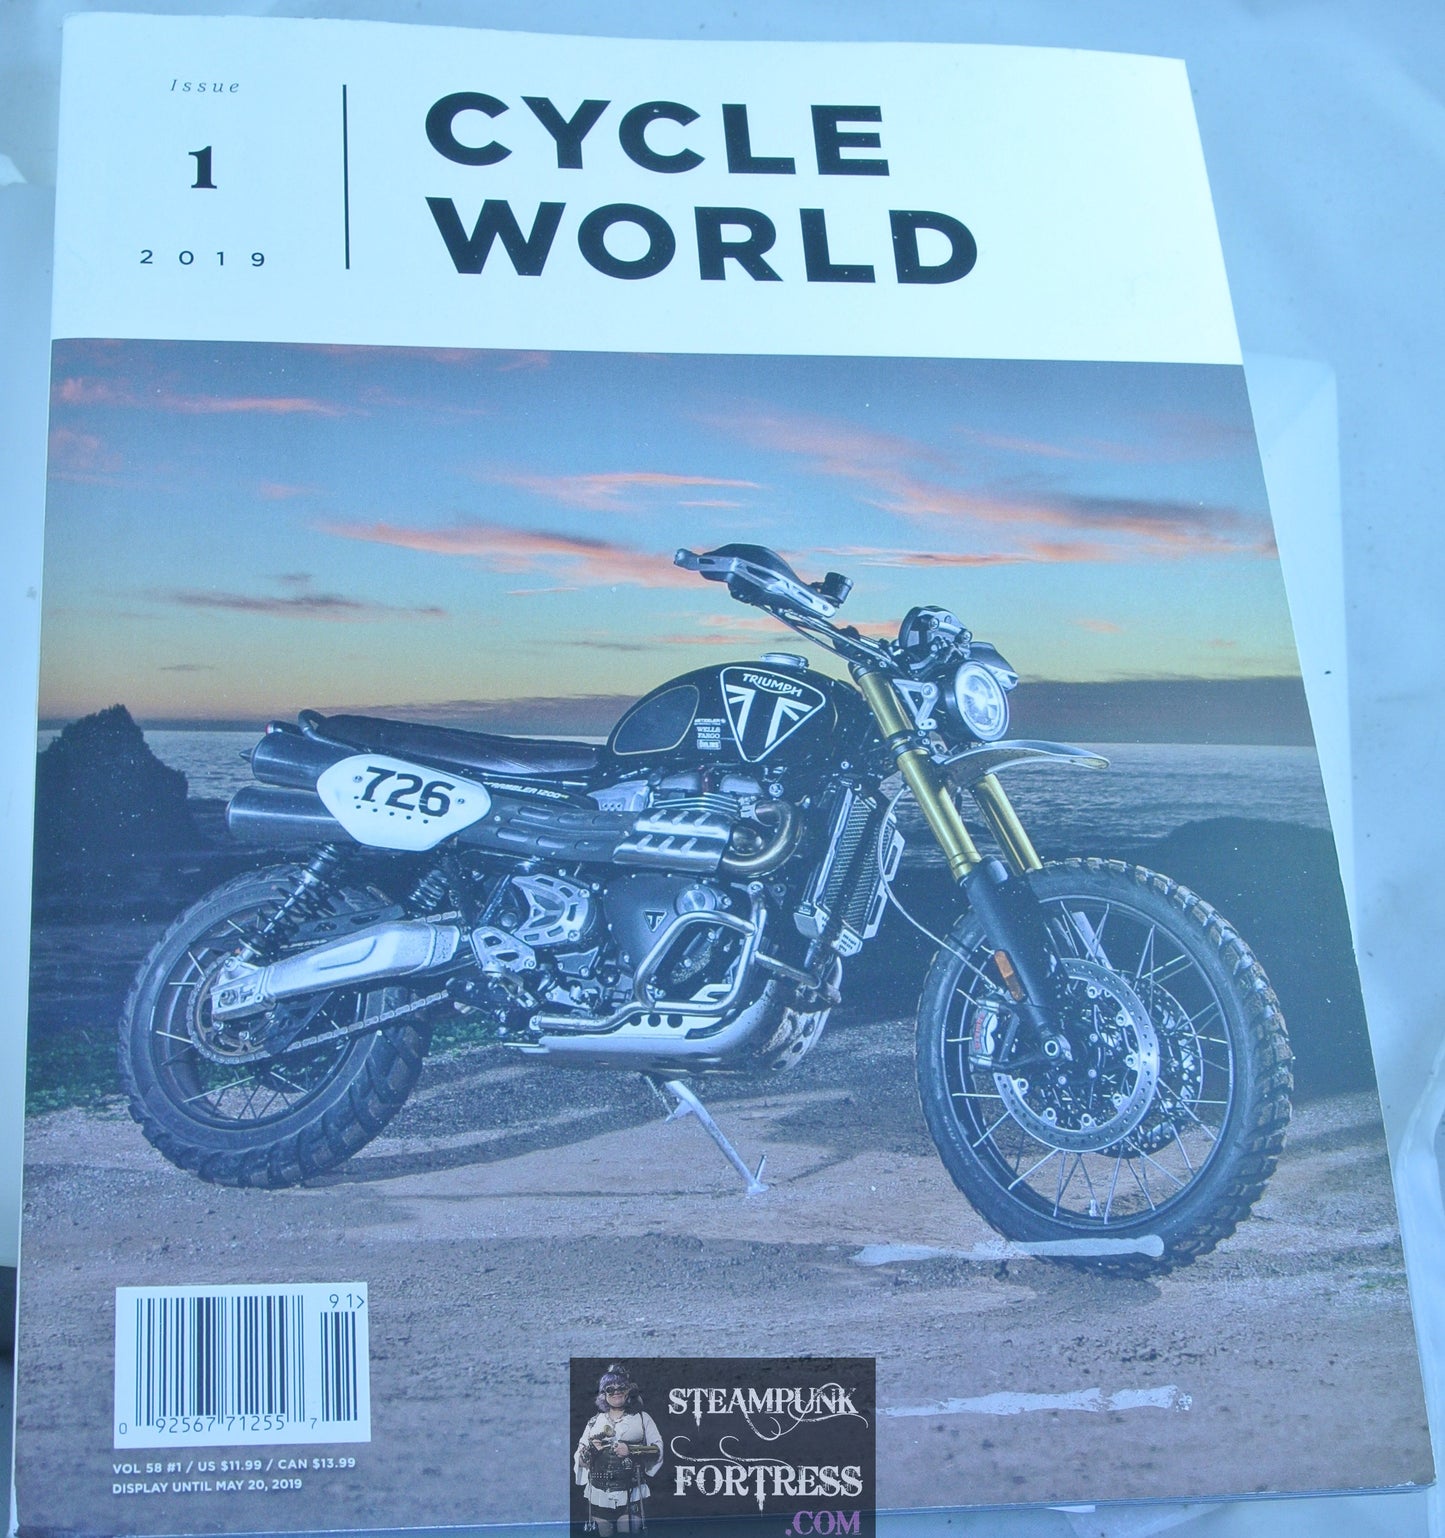 CYCLE WORLD MAGAZINE NUMBER 1 2019 GOOD MOTORCYCLES BIKERS VERY GOOD